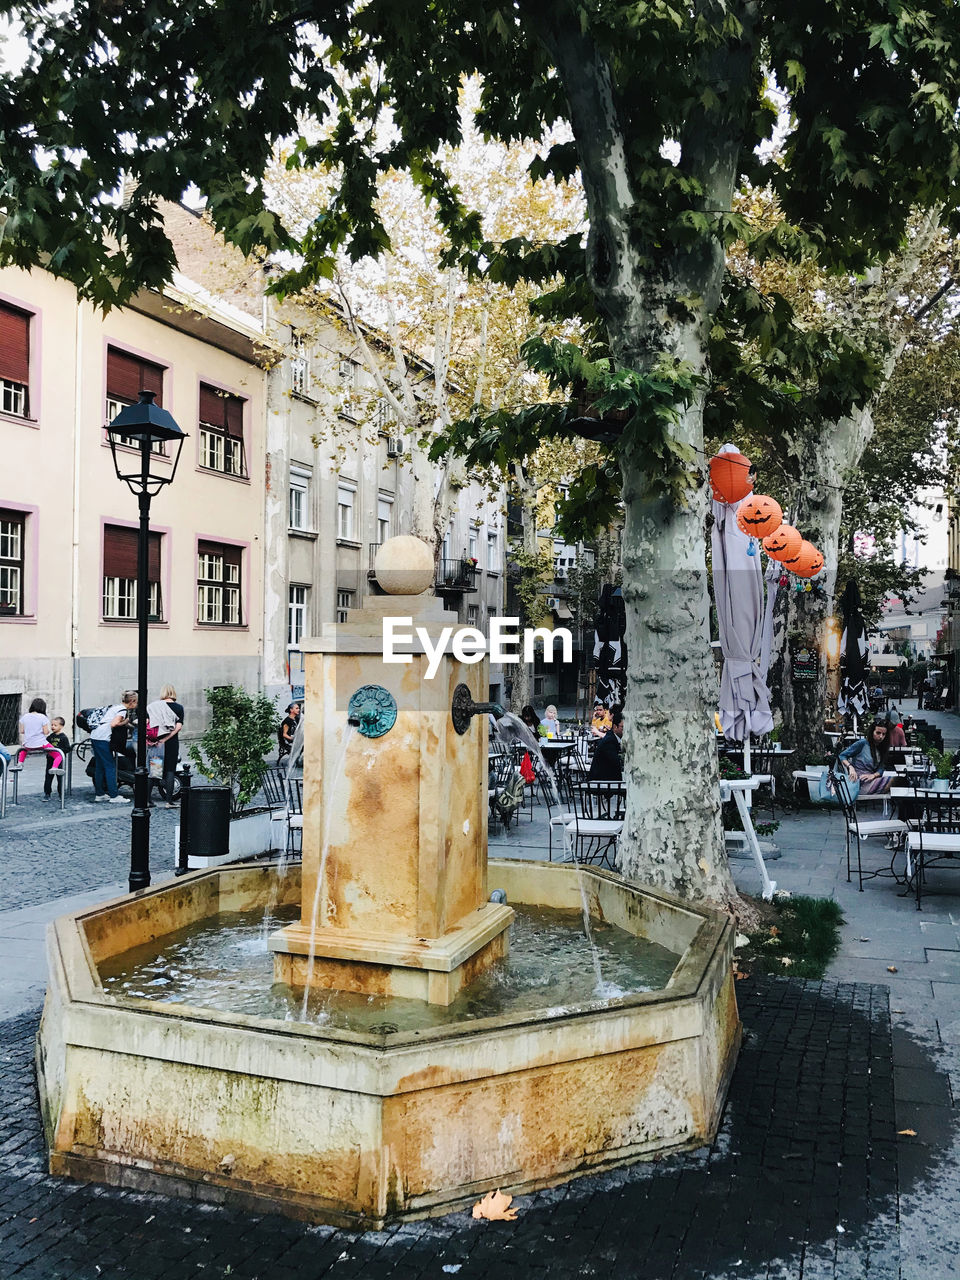 VIEW OF FOUNTAIN IN CITY AGAINST TREES